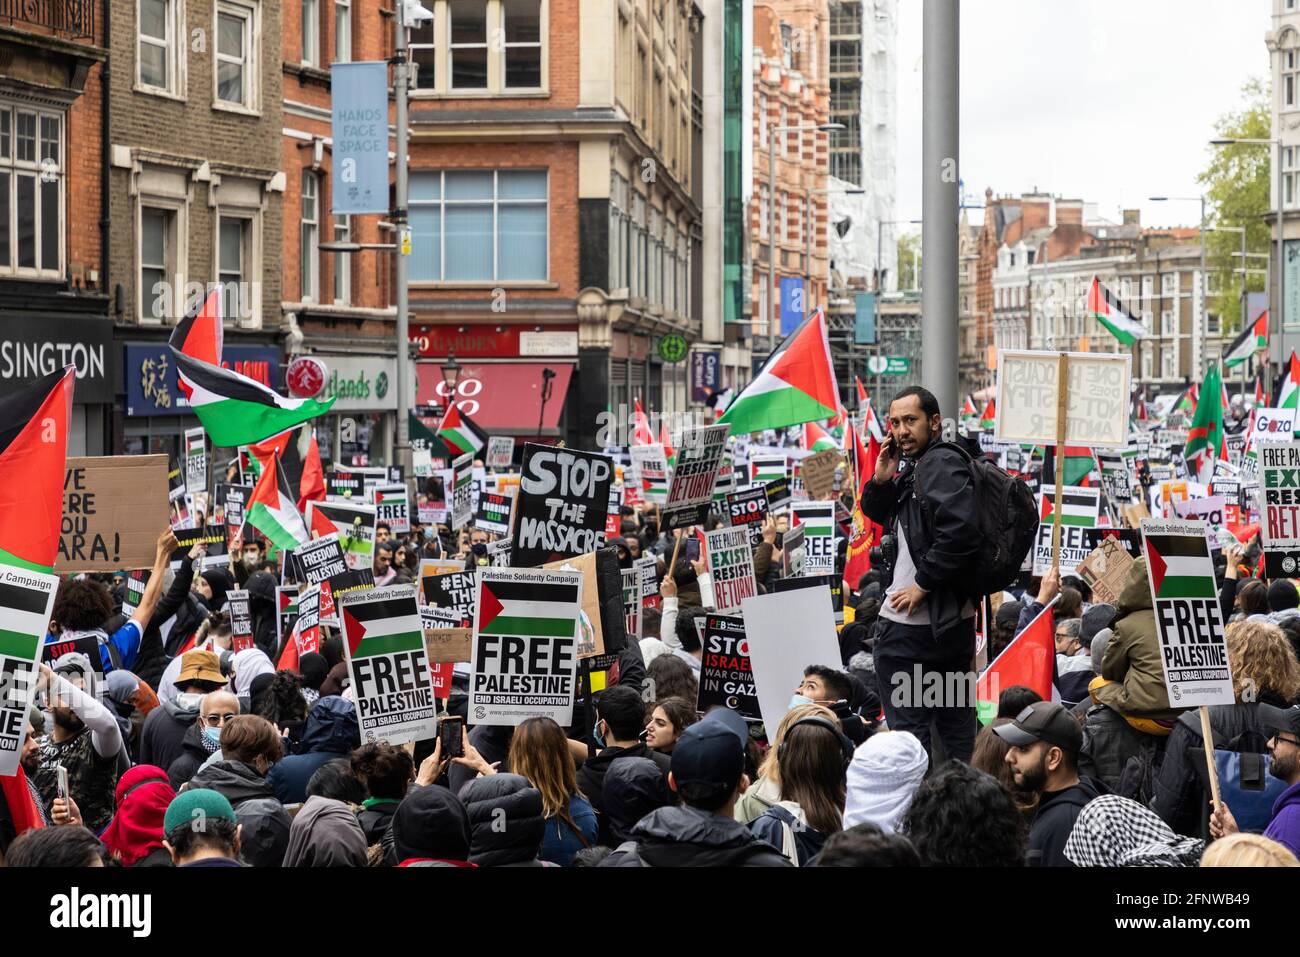 Large crowd of protesters with flags and placards, 'Free Palestine' solidarity protest, London, 15 May 2021 Stock Photo